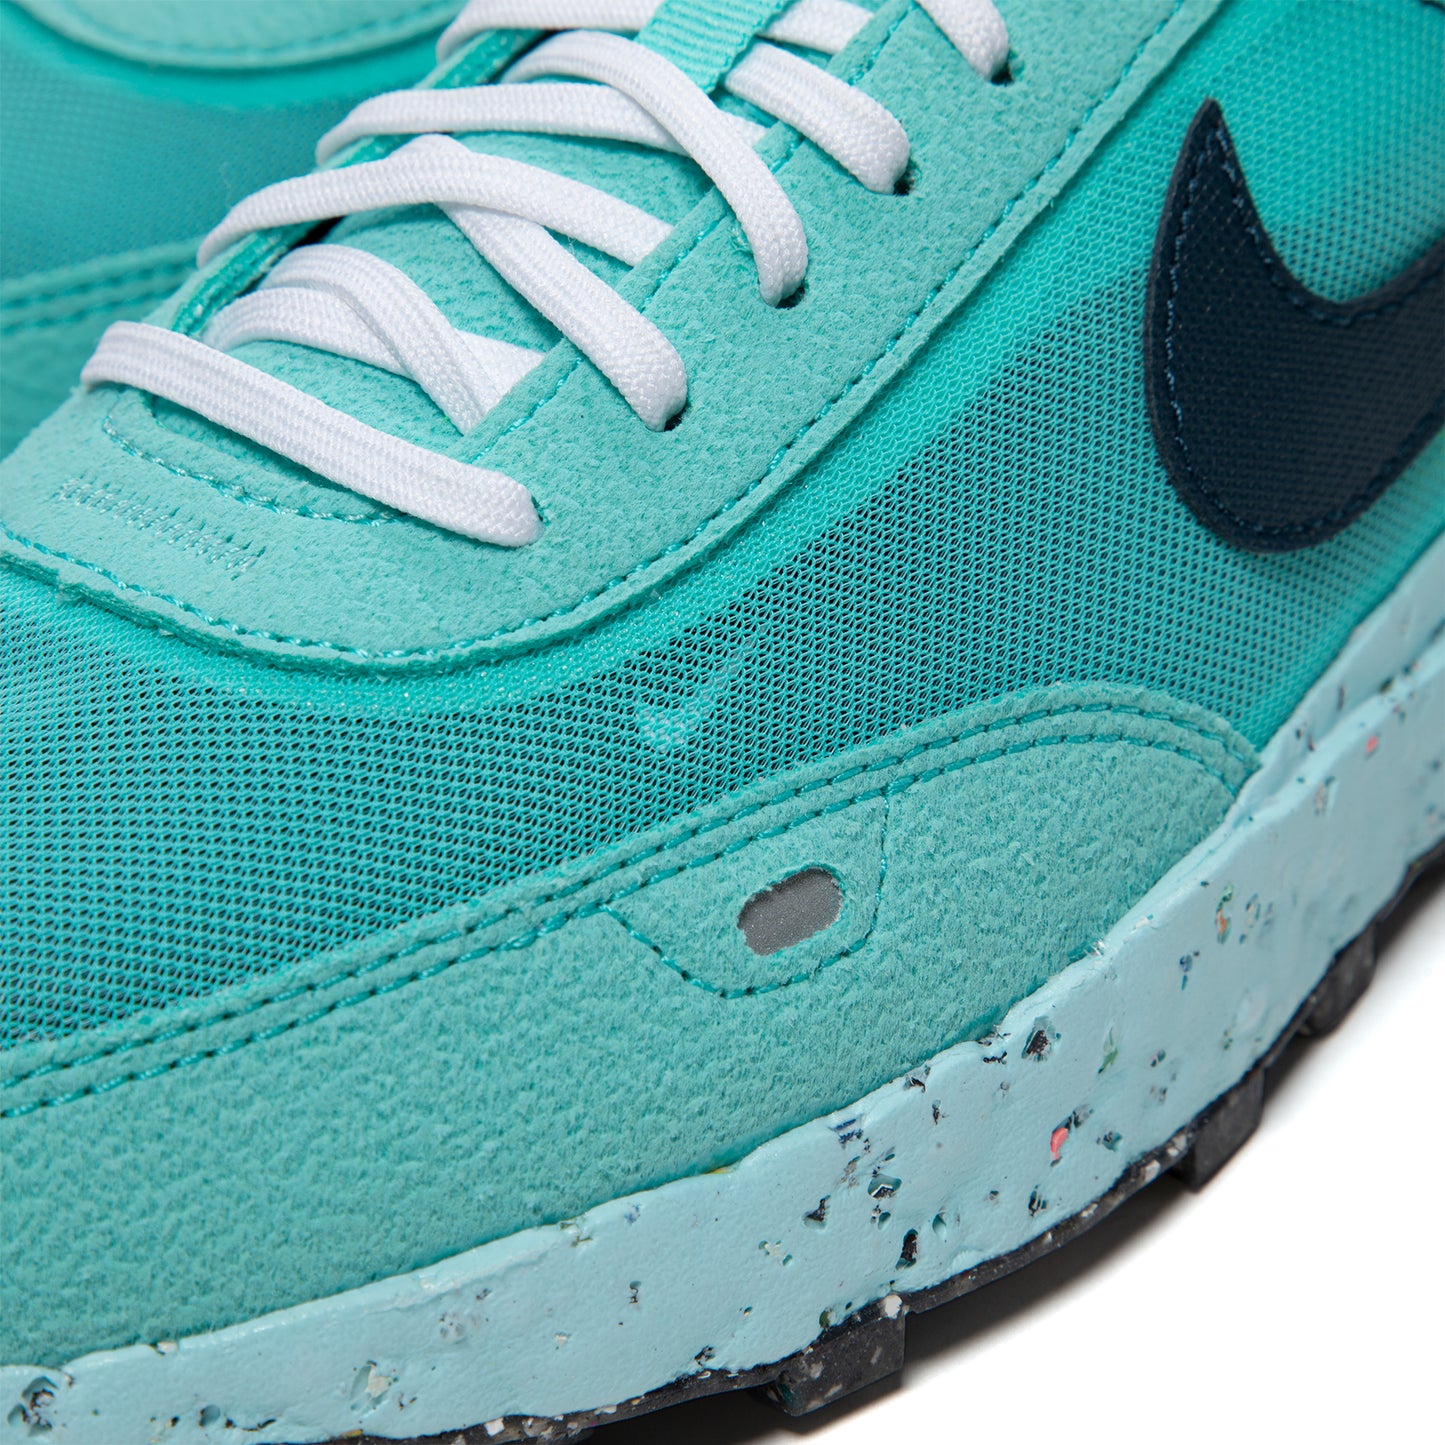 Nike Womens Waffle One Crater SE (Dynamic Turquoise/Armory Navy)